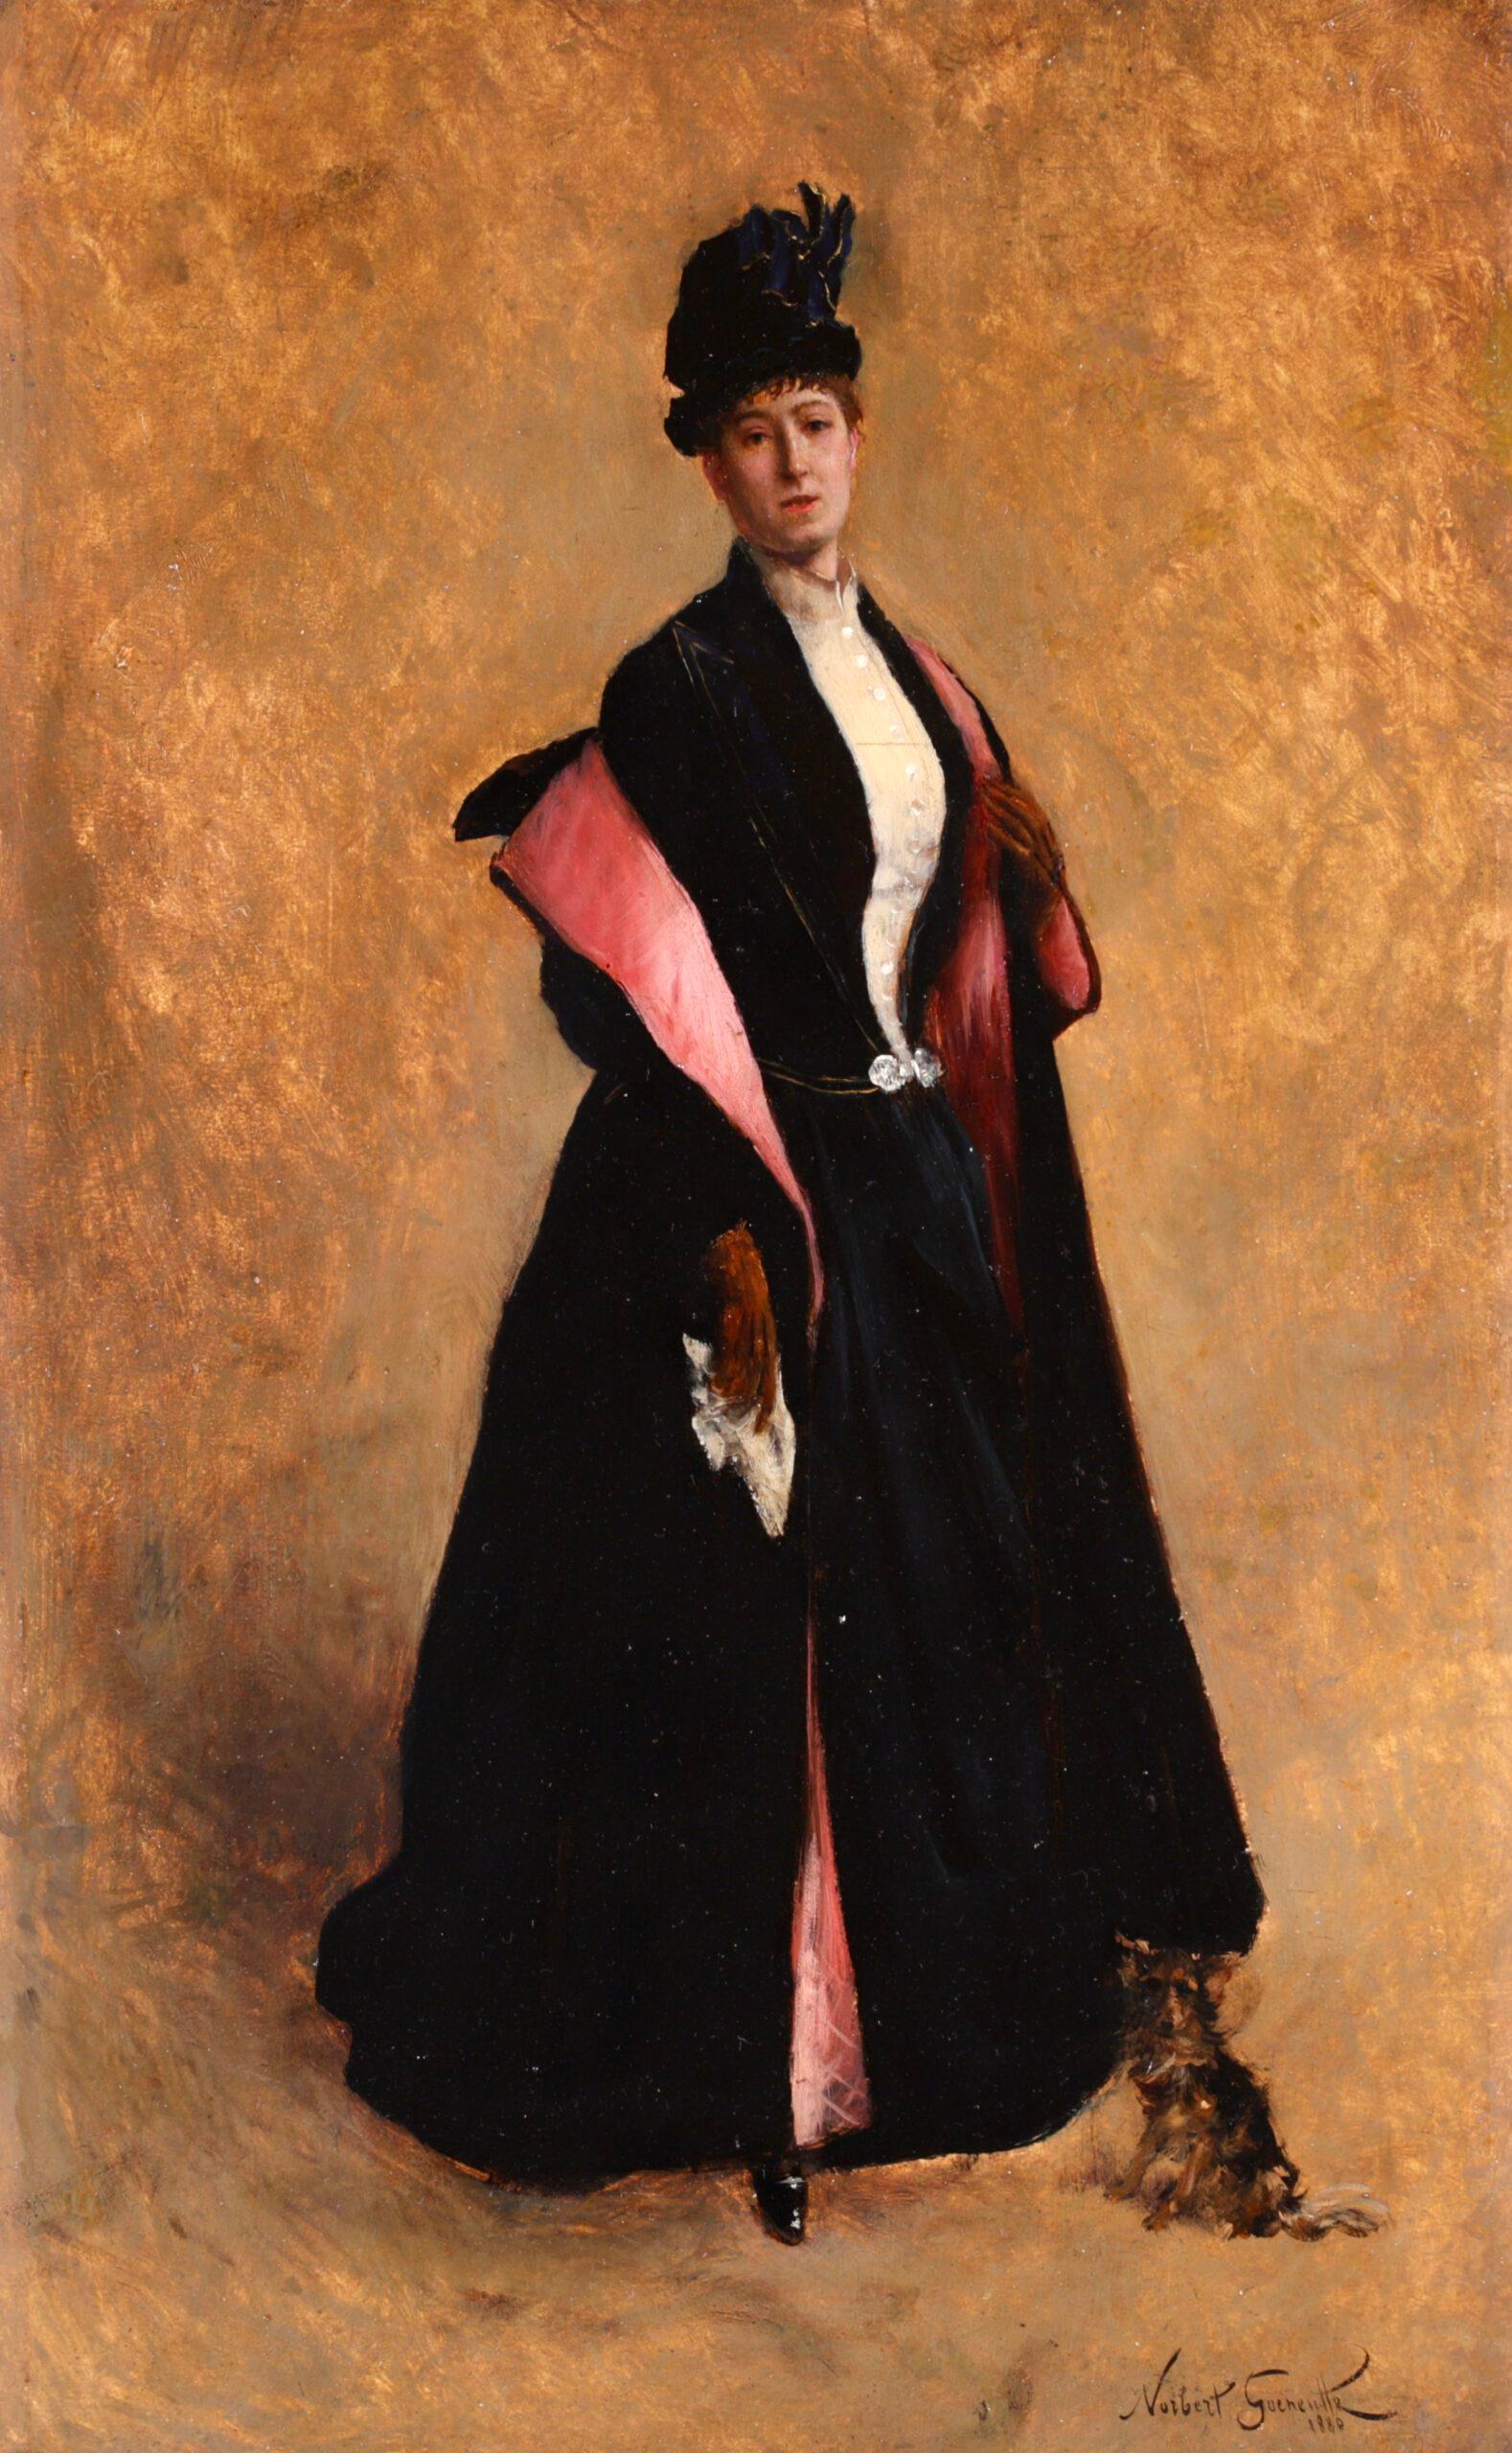 Signed, titled and dated figurative oil on panel by French impressionist painter Norbert Goeneutte. The work depicts an elegant lady dressed in black with a white blouse and a full length black coat lined with red satin. She is clutching a white